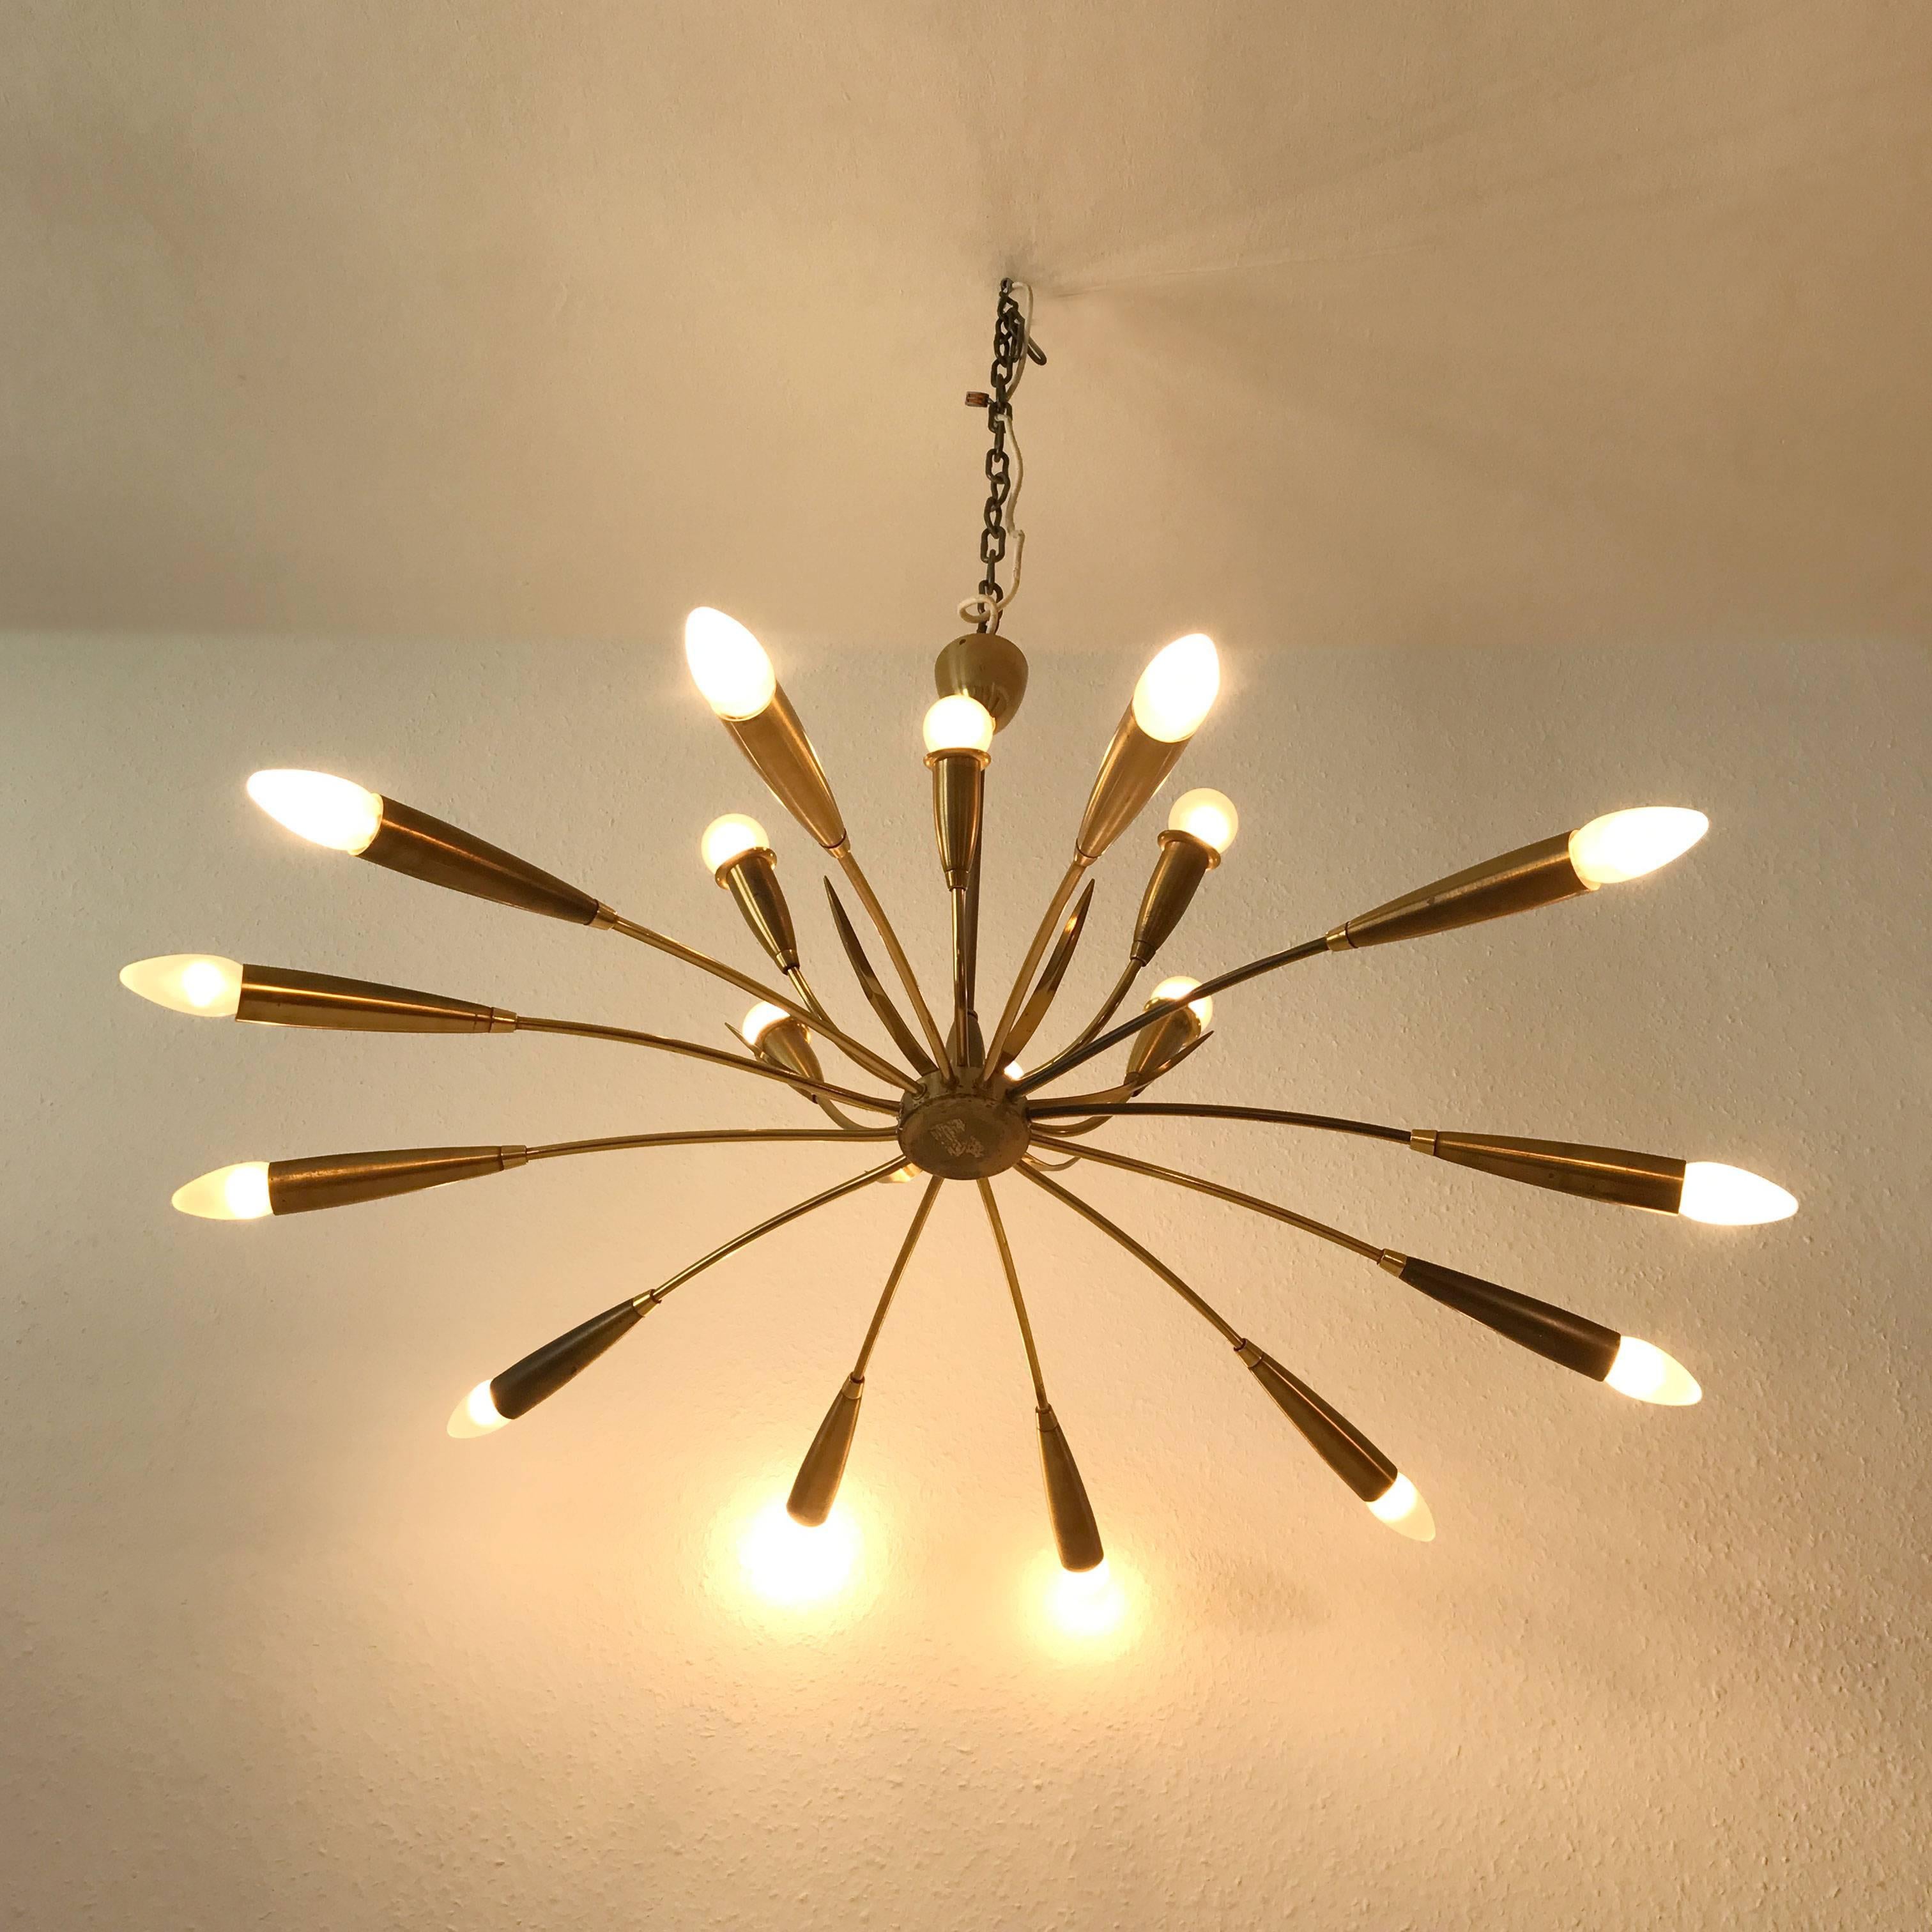 Large Sputnik chandelier with 18 arms. Manufactured in 1950s, Germany. The lamp needs 18 x E14 screw fit bulbs.